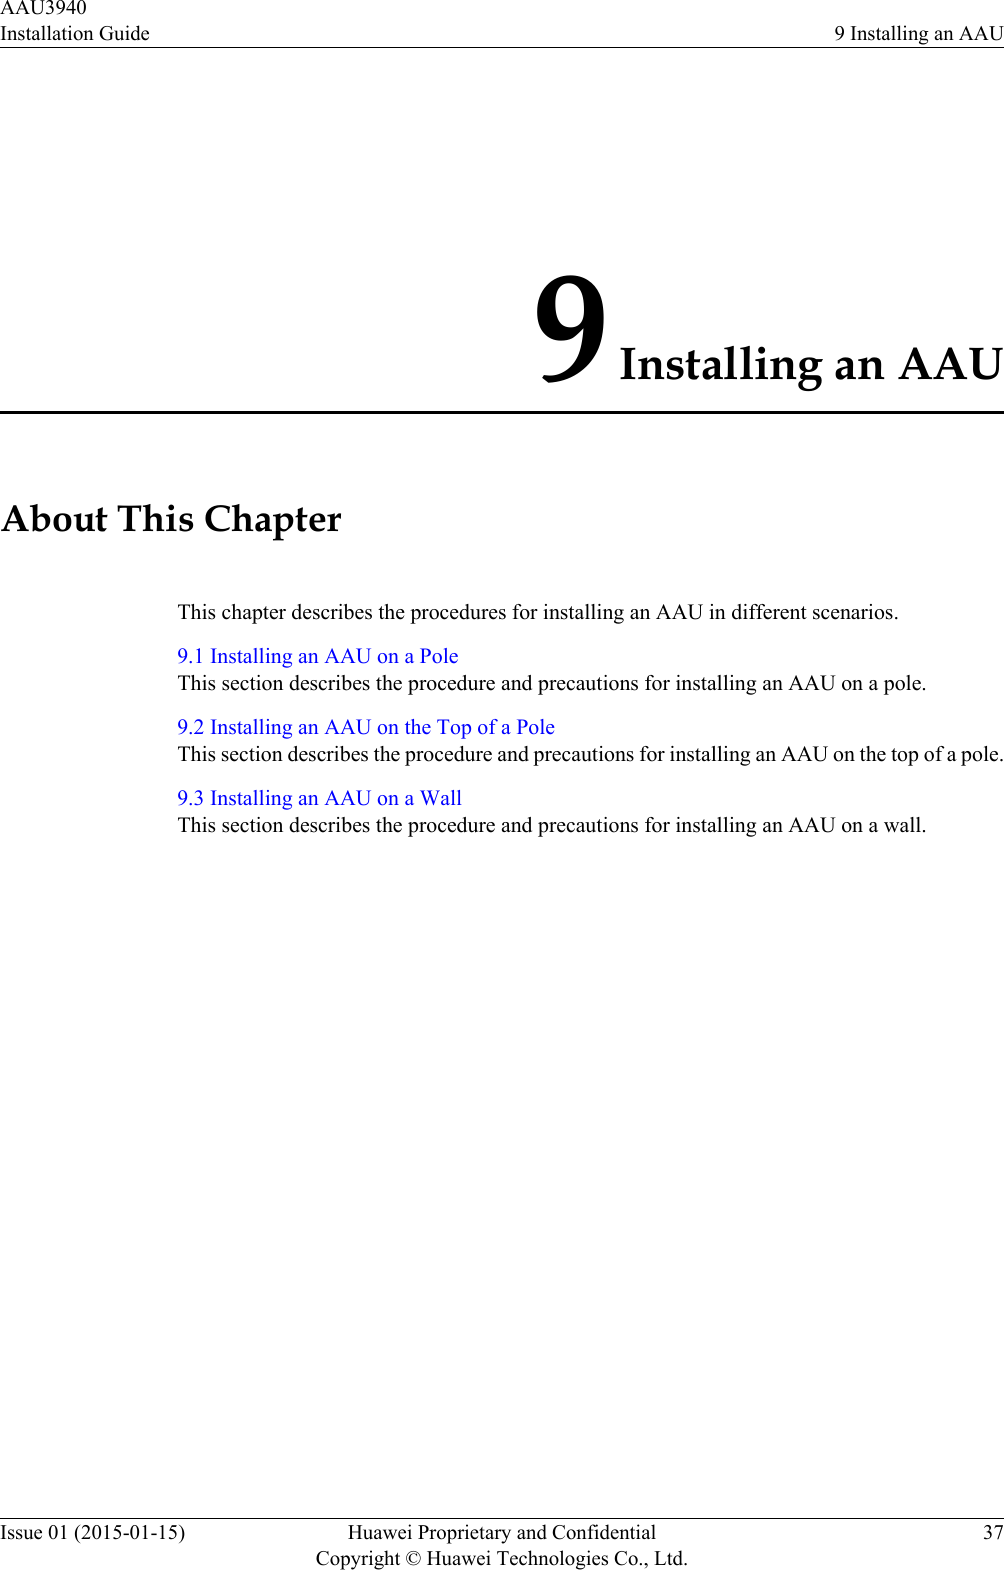 9 Installing an AAUAbout This ChapterThis chapter describes the procedures for installing an AAU in different scenarios.9.1 Installing an AAU on a PoleThis section describes the procedure and precautions for installing an AAU on a pole.9.2 Installing an AAU on the Top of a PoleThis section describes the procedure and precautions for installing an AAU on the top of a pole.9.3 Installing an AAU on a WallThis section describes the procedure and precautions for installing an AAU on a wall.AAU3940Installation Guide 9 Installing an AAUIssue 01 (2015-01-15) Huawei Proprietary and ConfidentialCopyright © Huawei Technologies Co., Ltd.37